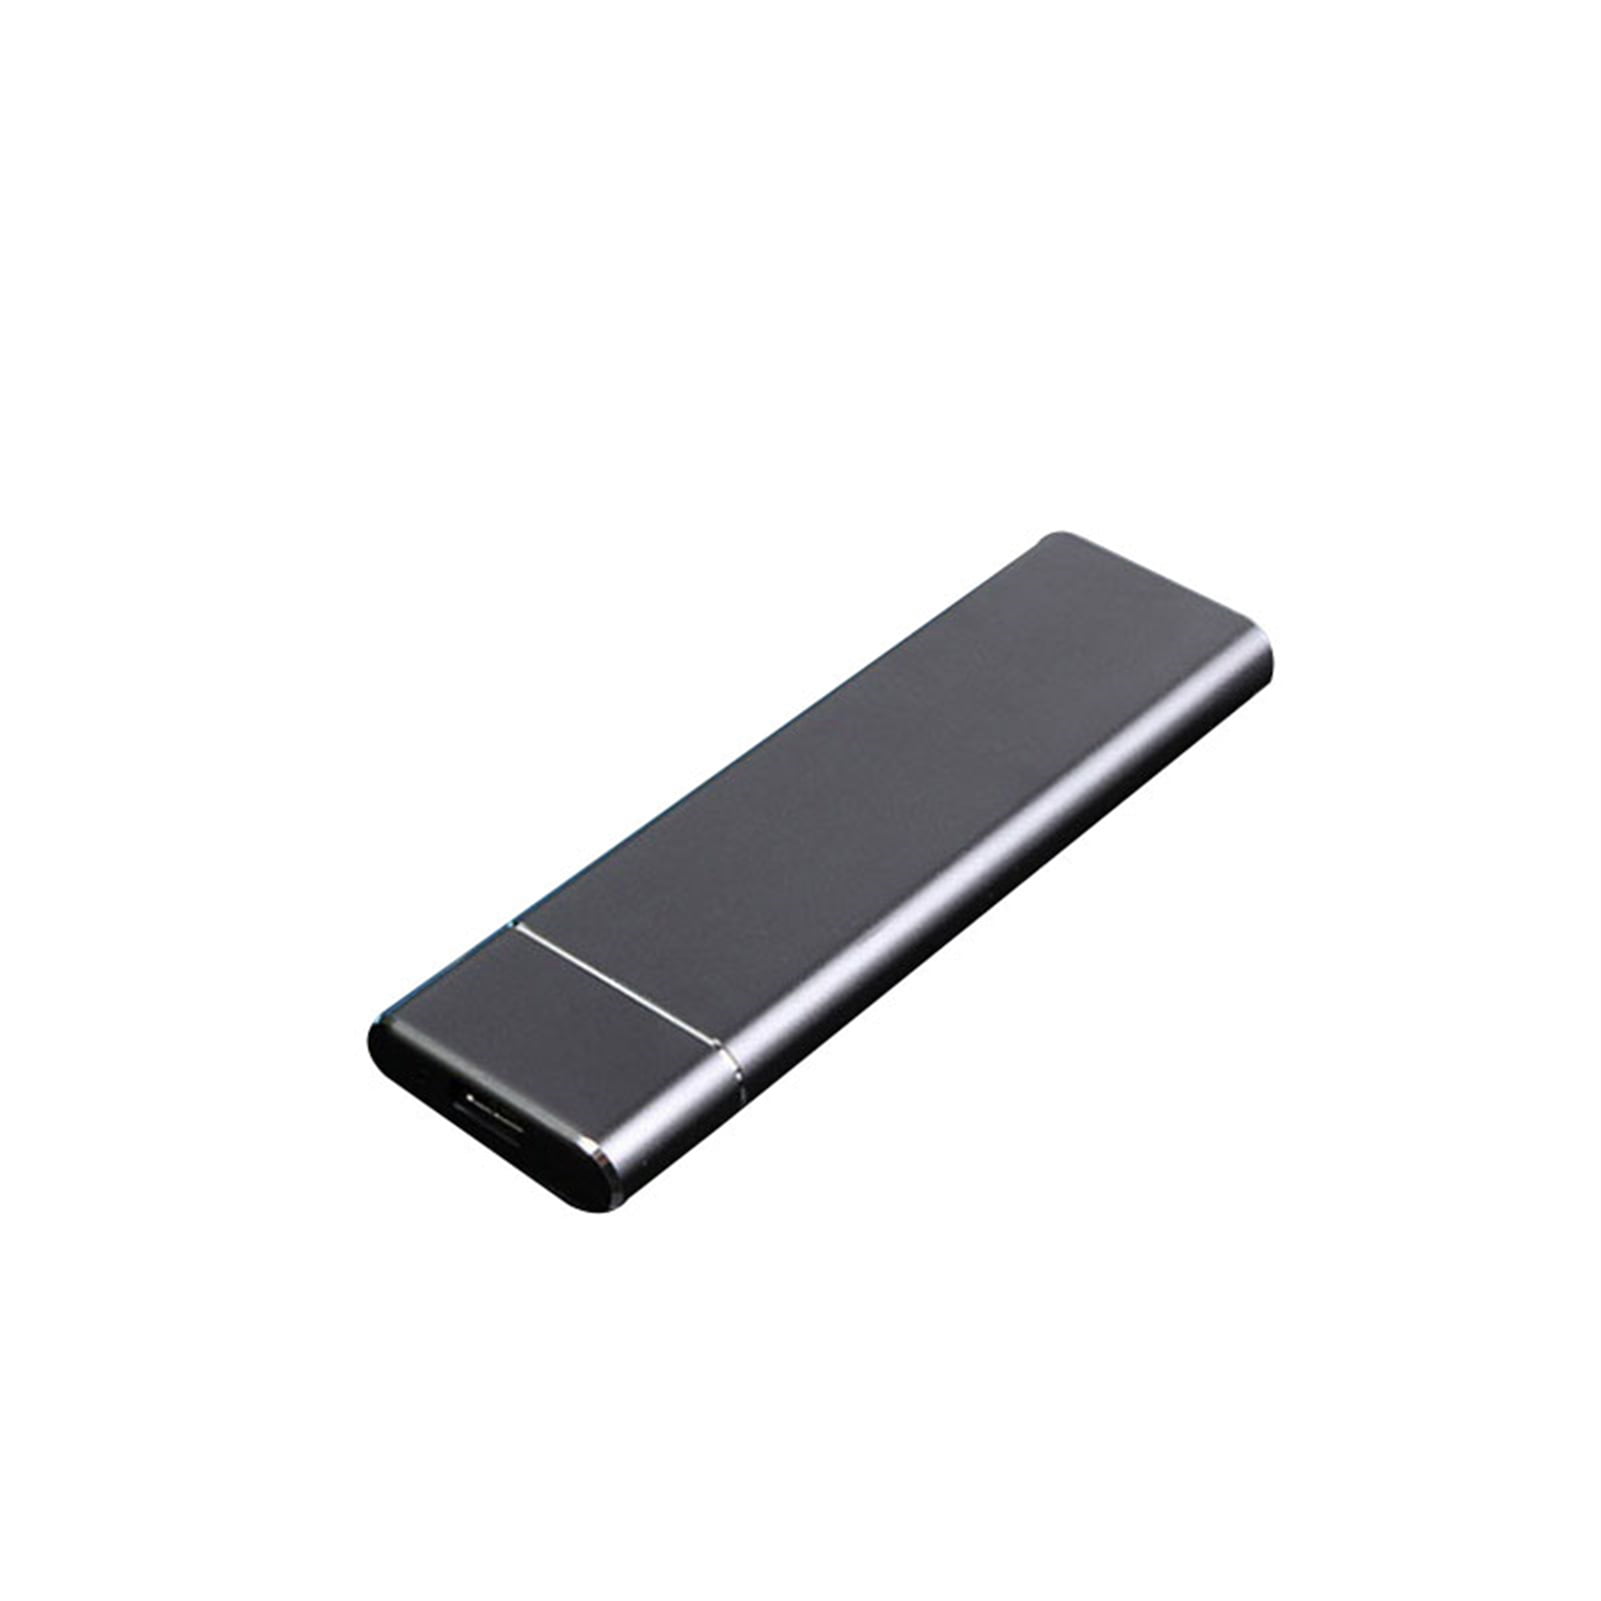 Portable & Large Capability Mobile Solid State Drive For Laptops Desktop 2T, Silver StarneA Ultra Speed External SSD